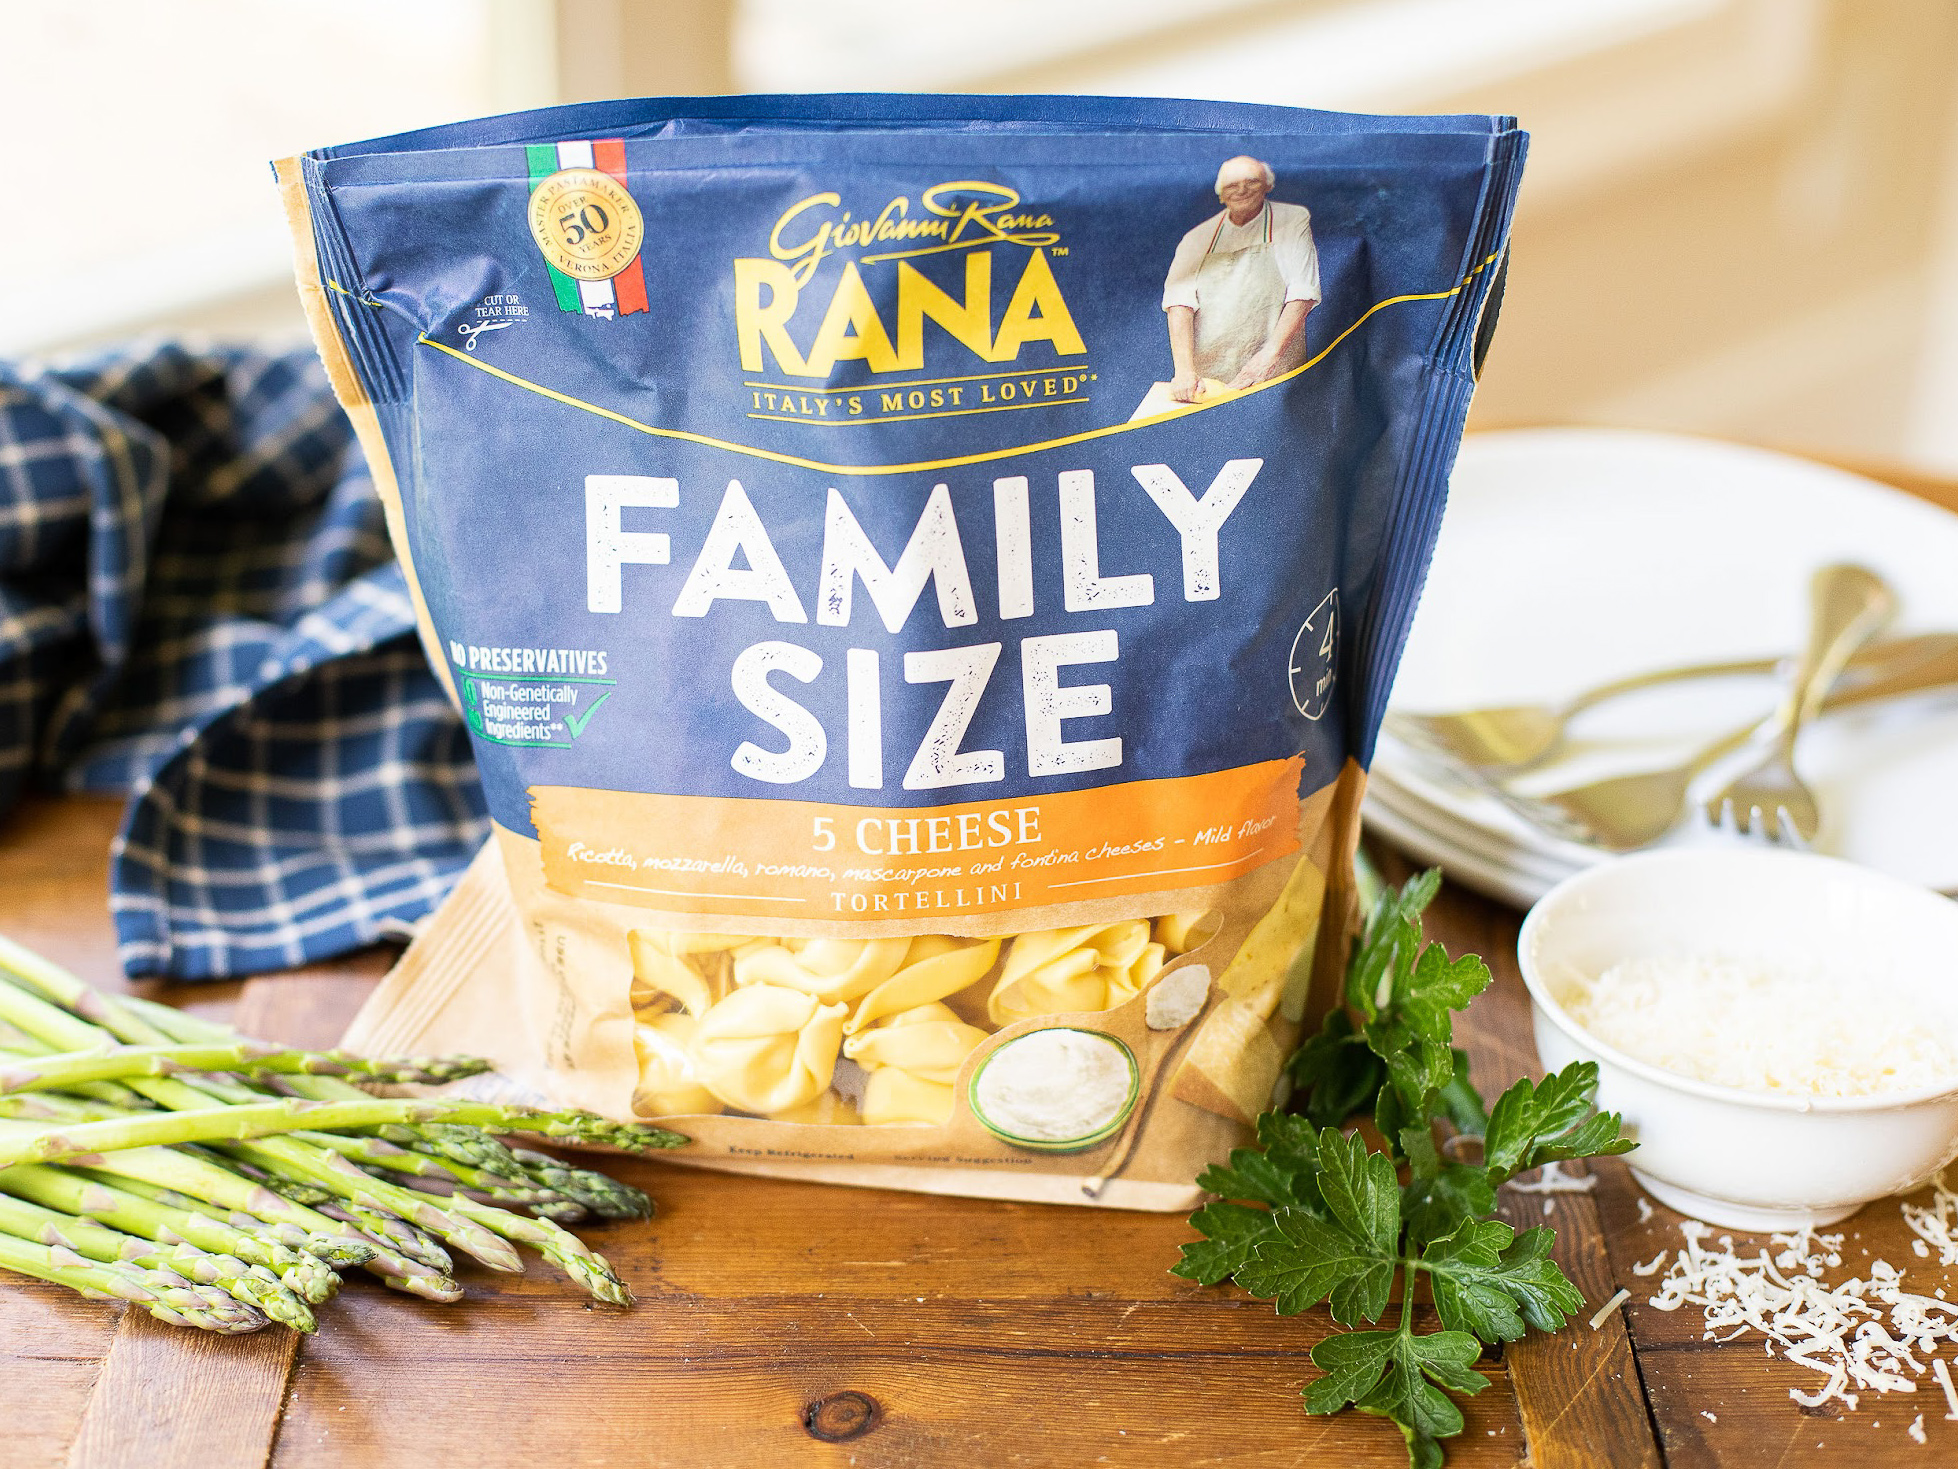 Rana Family Size Pasta Only $4.99 At Publix